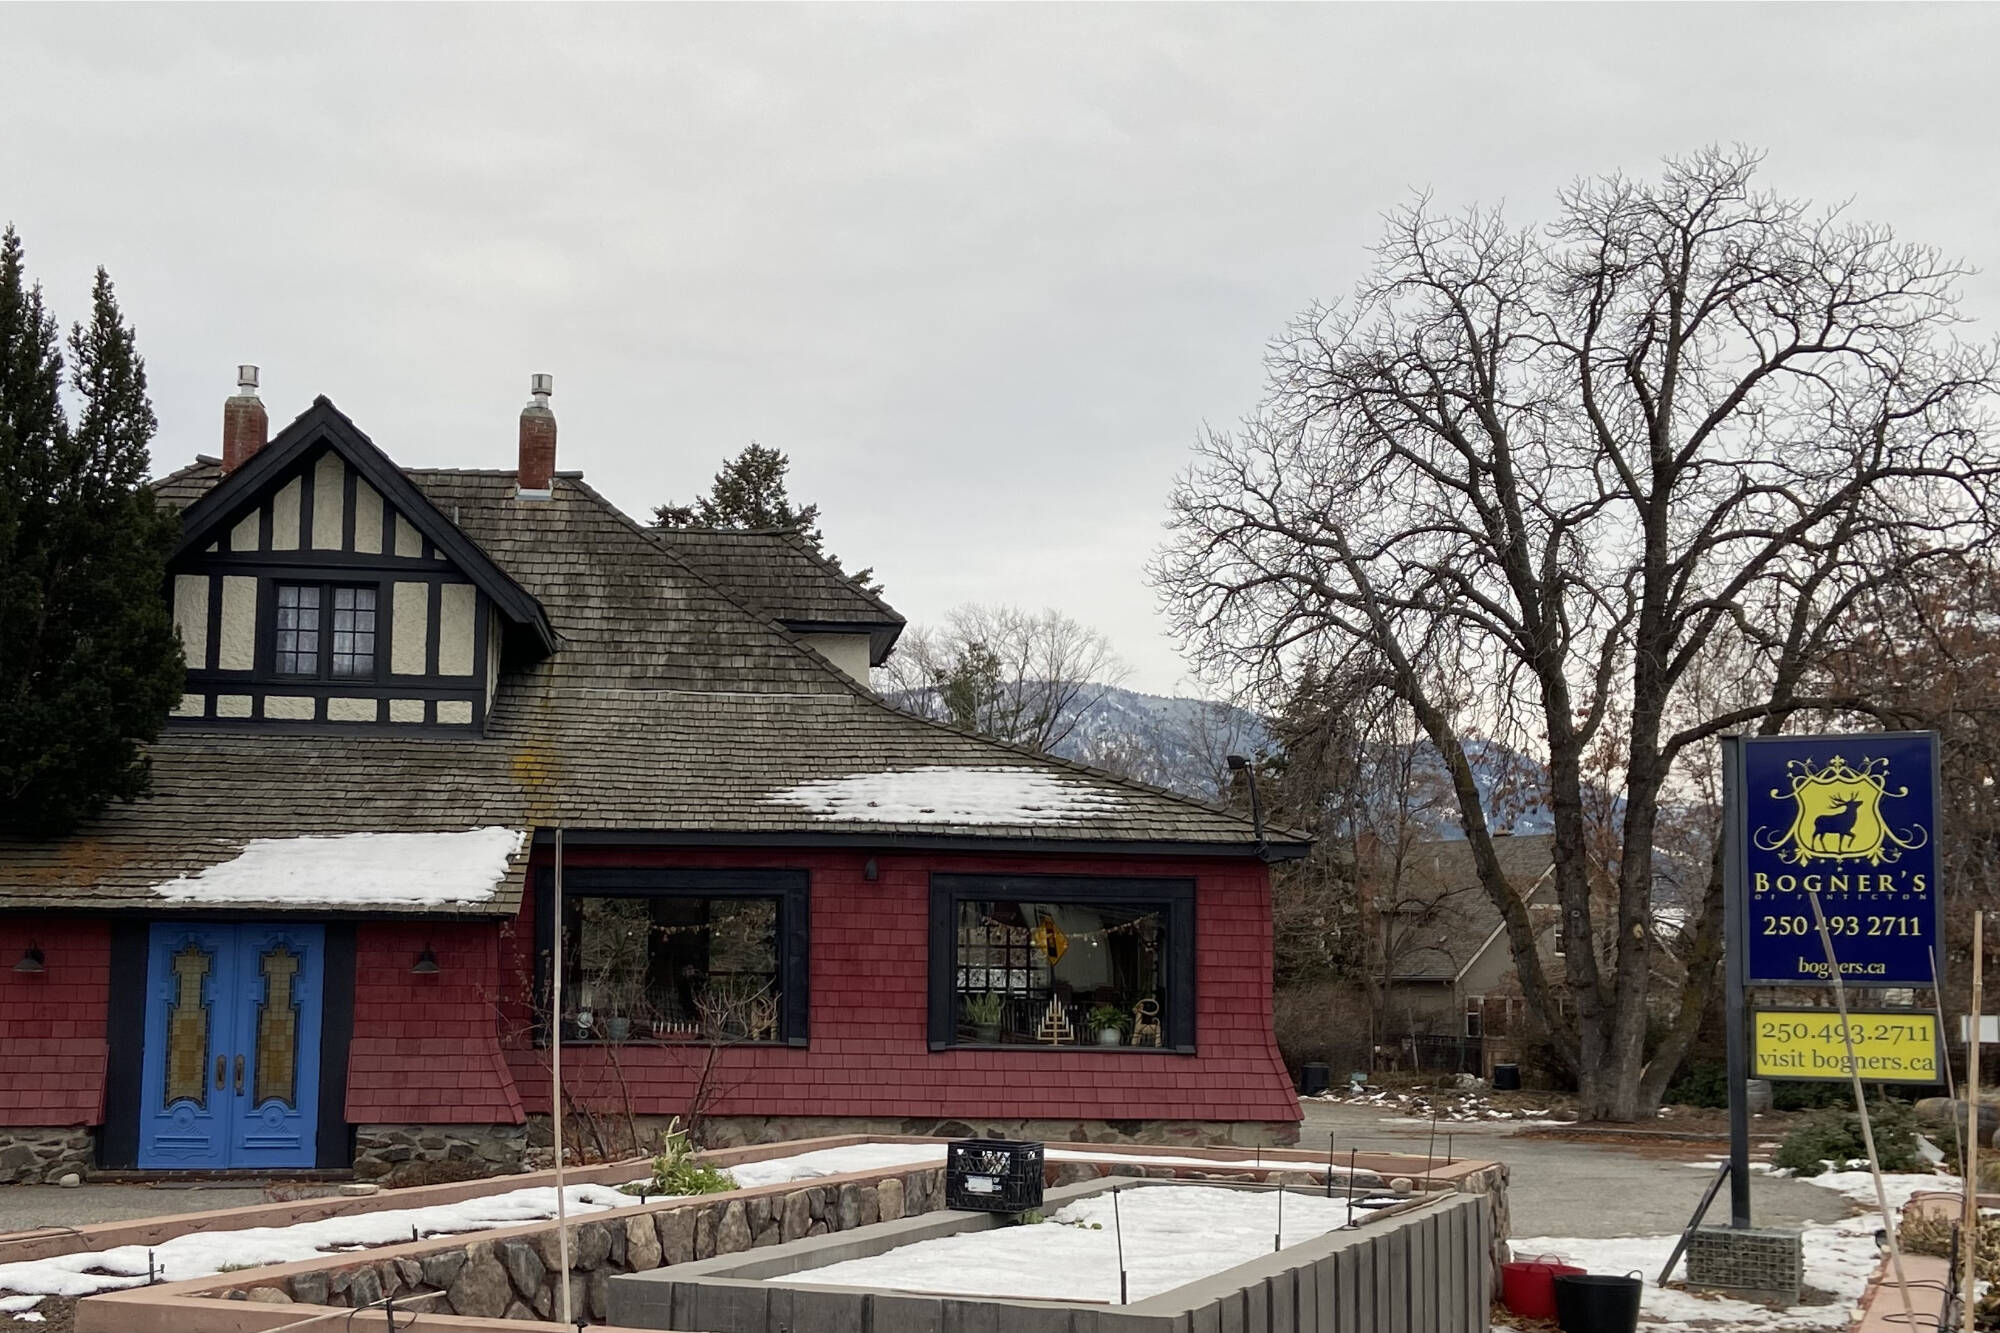 Built-in 1915, this Tudor-style home that has been Bogner’s restaurant since 1976 will be torn down and turned into office space. (Monique Tamminga Western News)